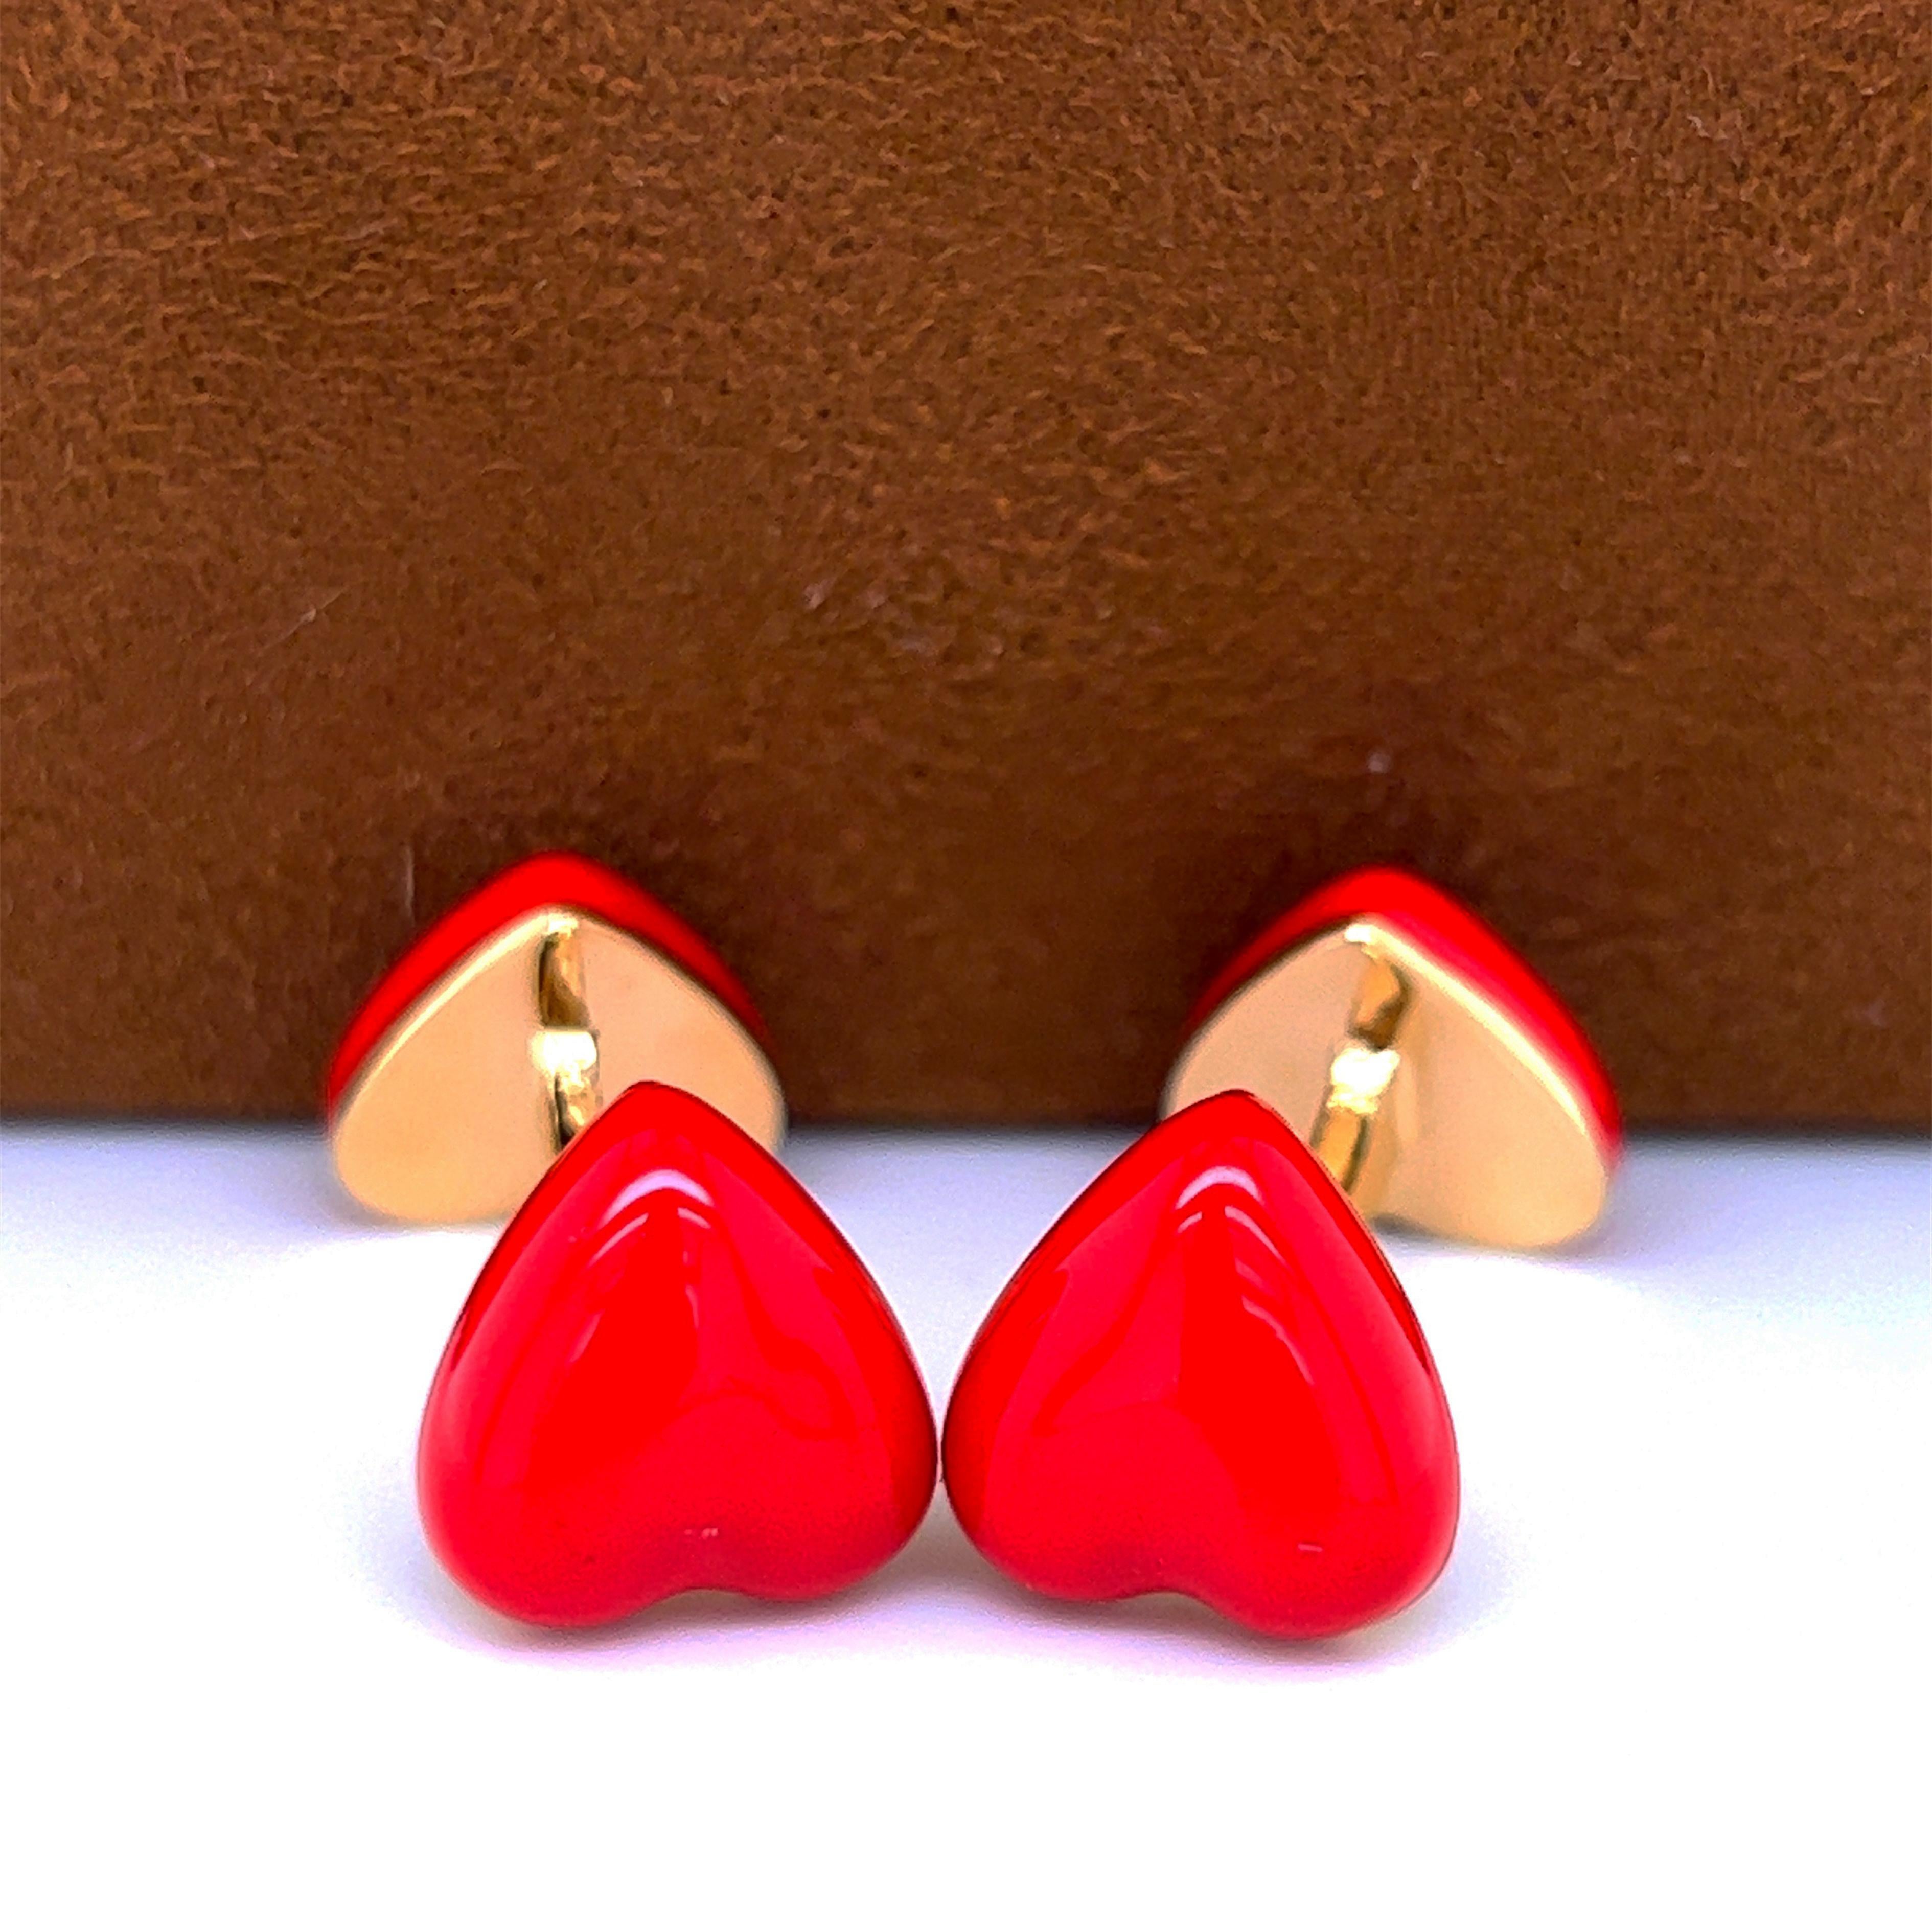 Berca Red Heart Shaped Hand Enamelled Sterling Silver Gold Plated Cufflinks For Sale 1